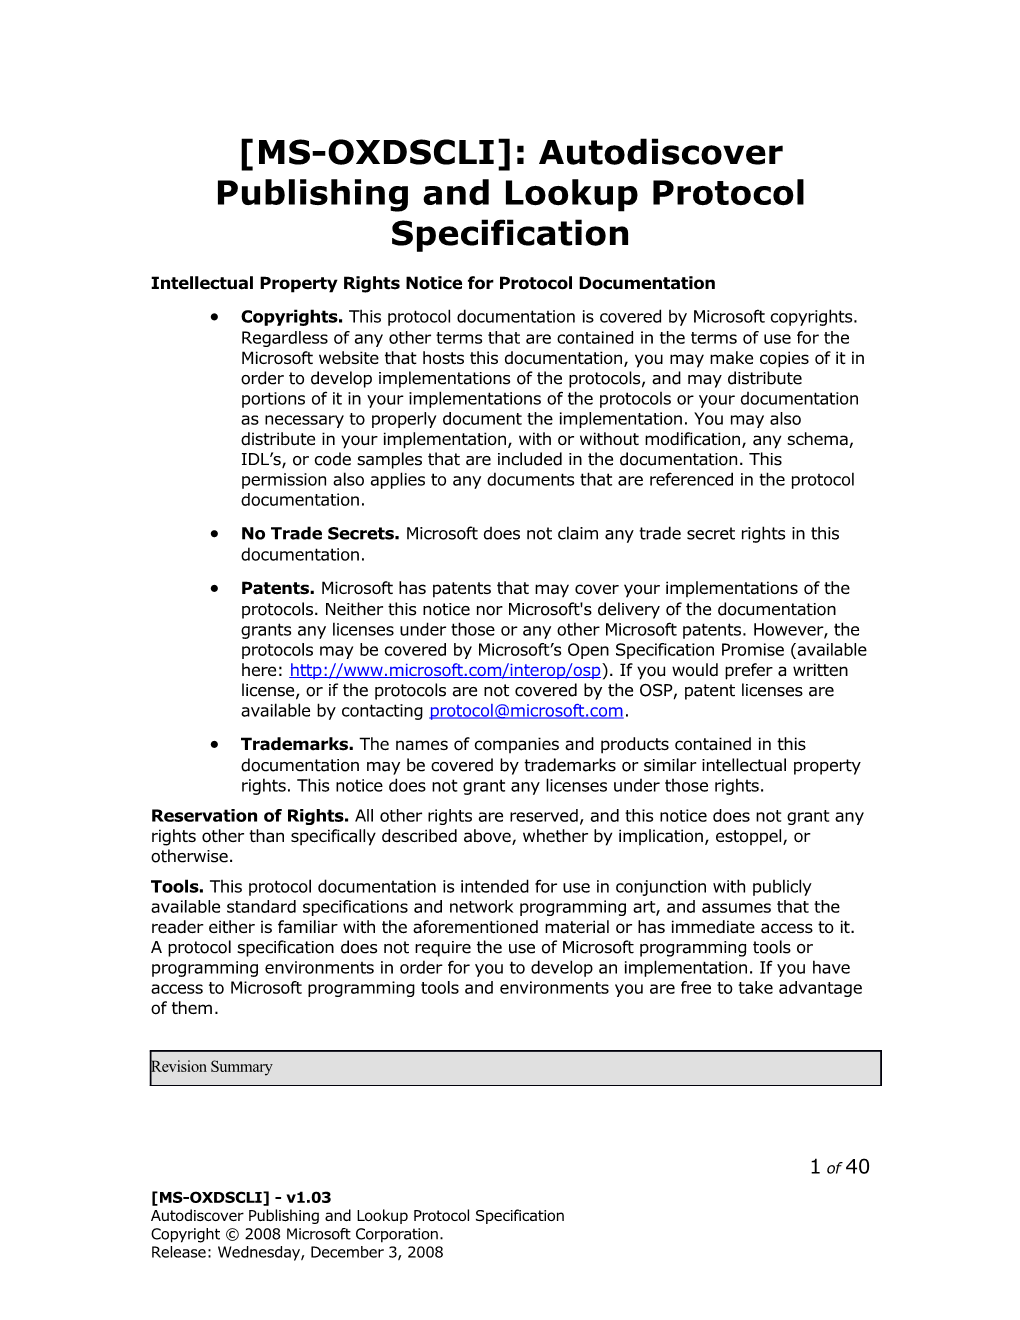 MS-OXDSCLI : Autodiscover Publishing and Lookup Protocol Specification